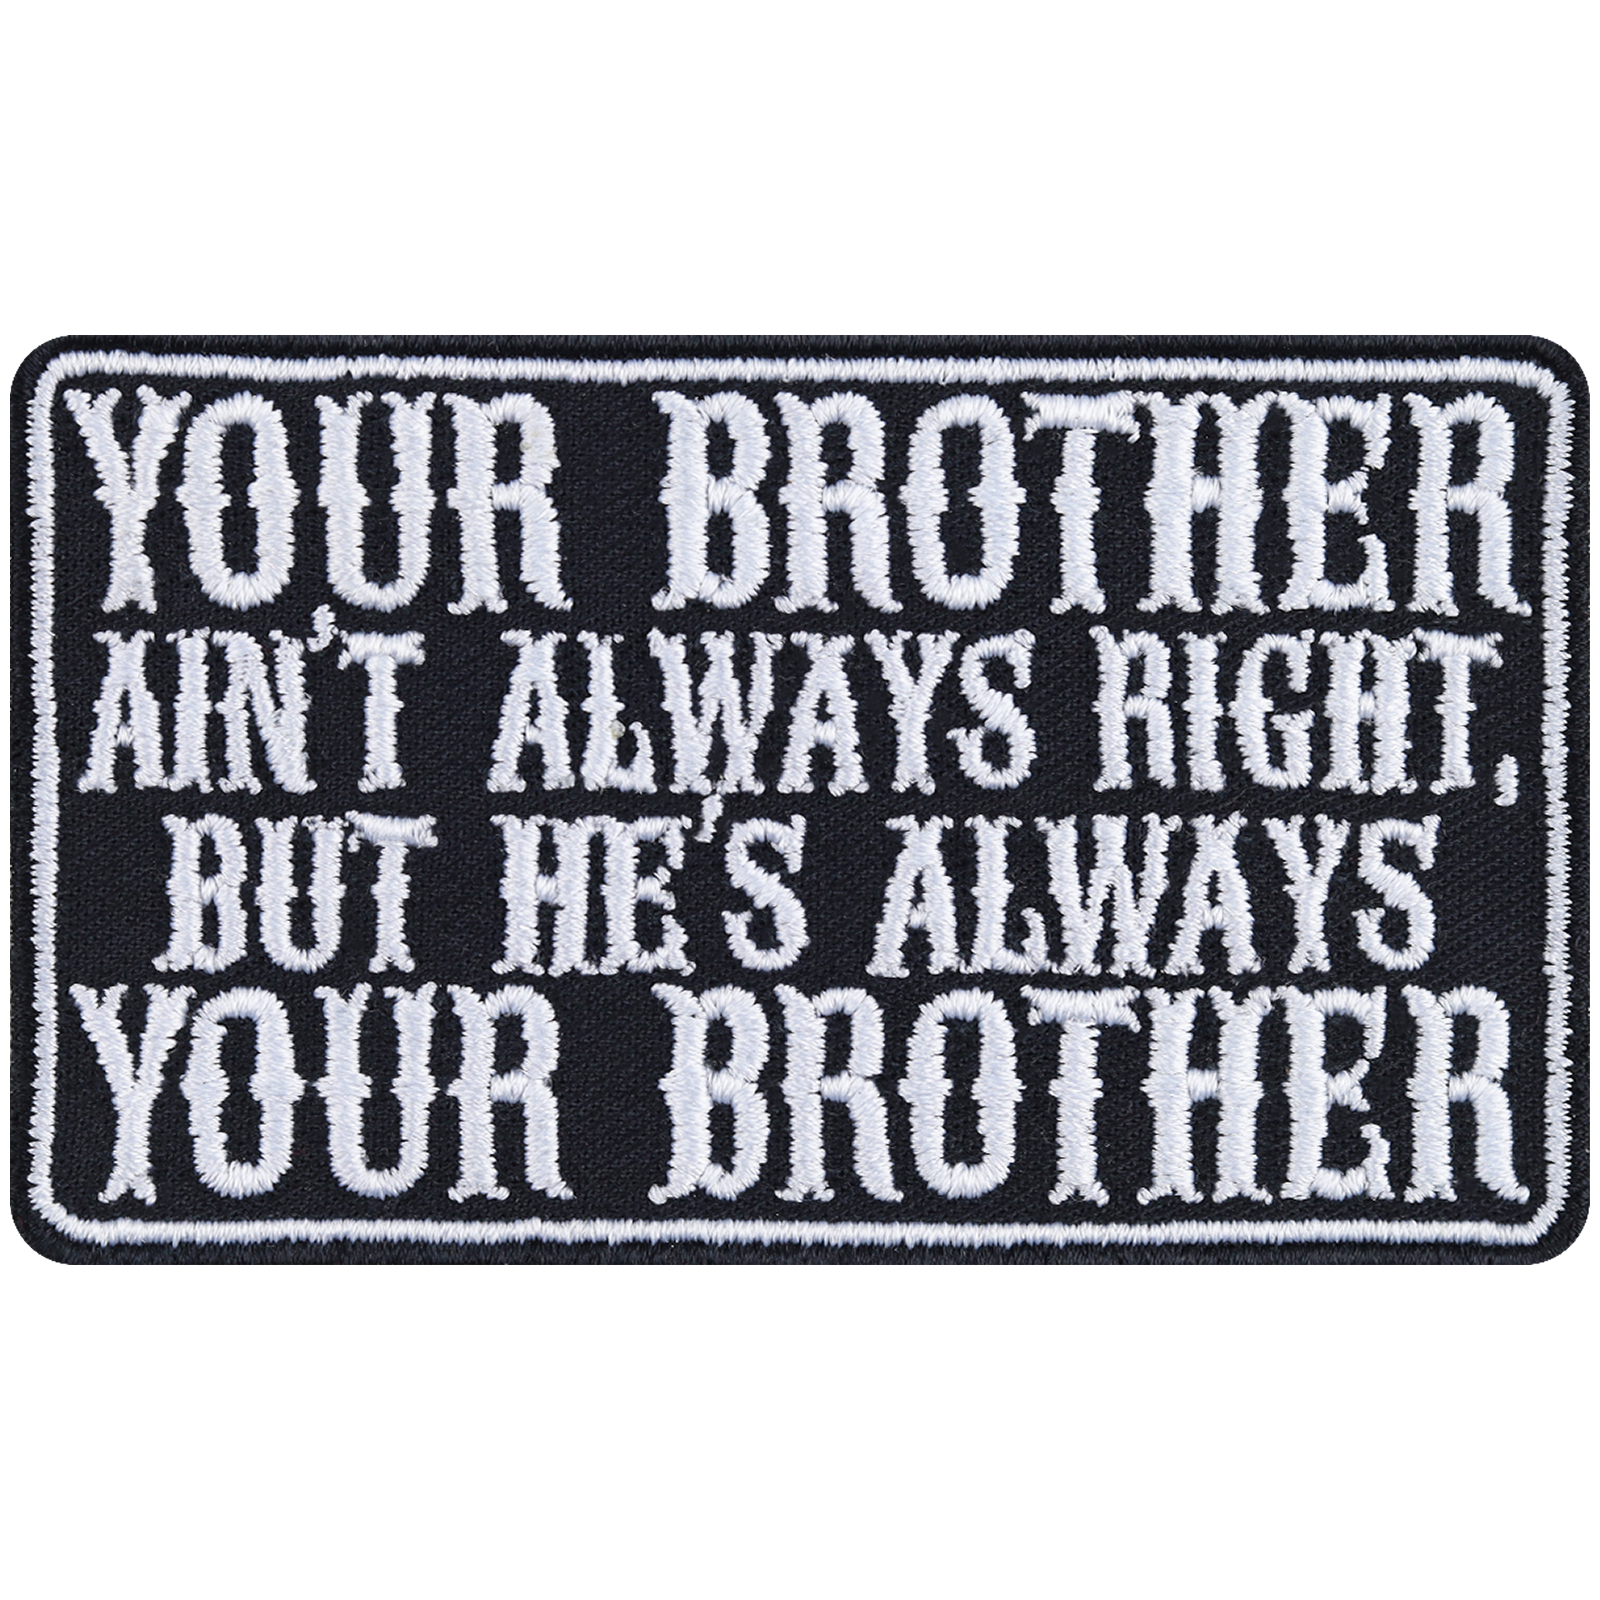 Your brother ain't always right, but he's always your brother - Patch